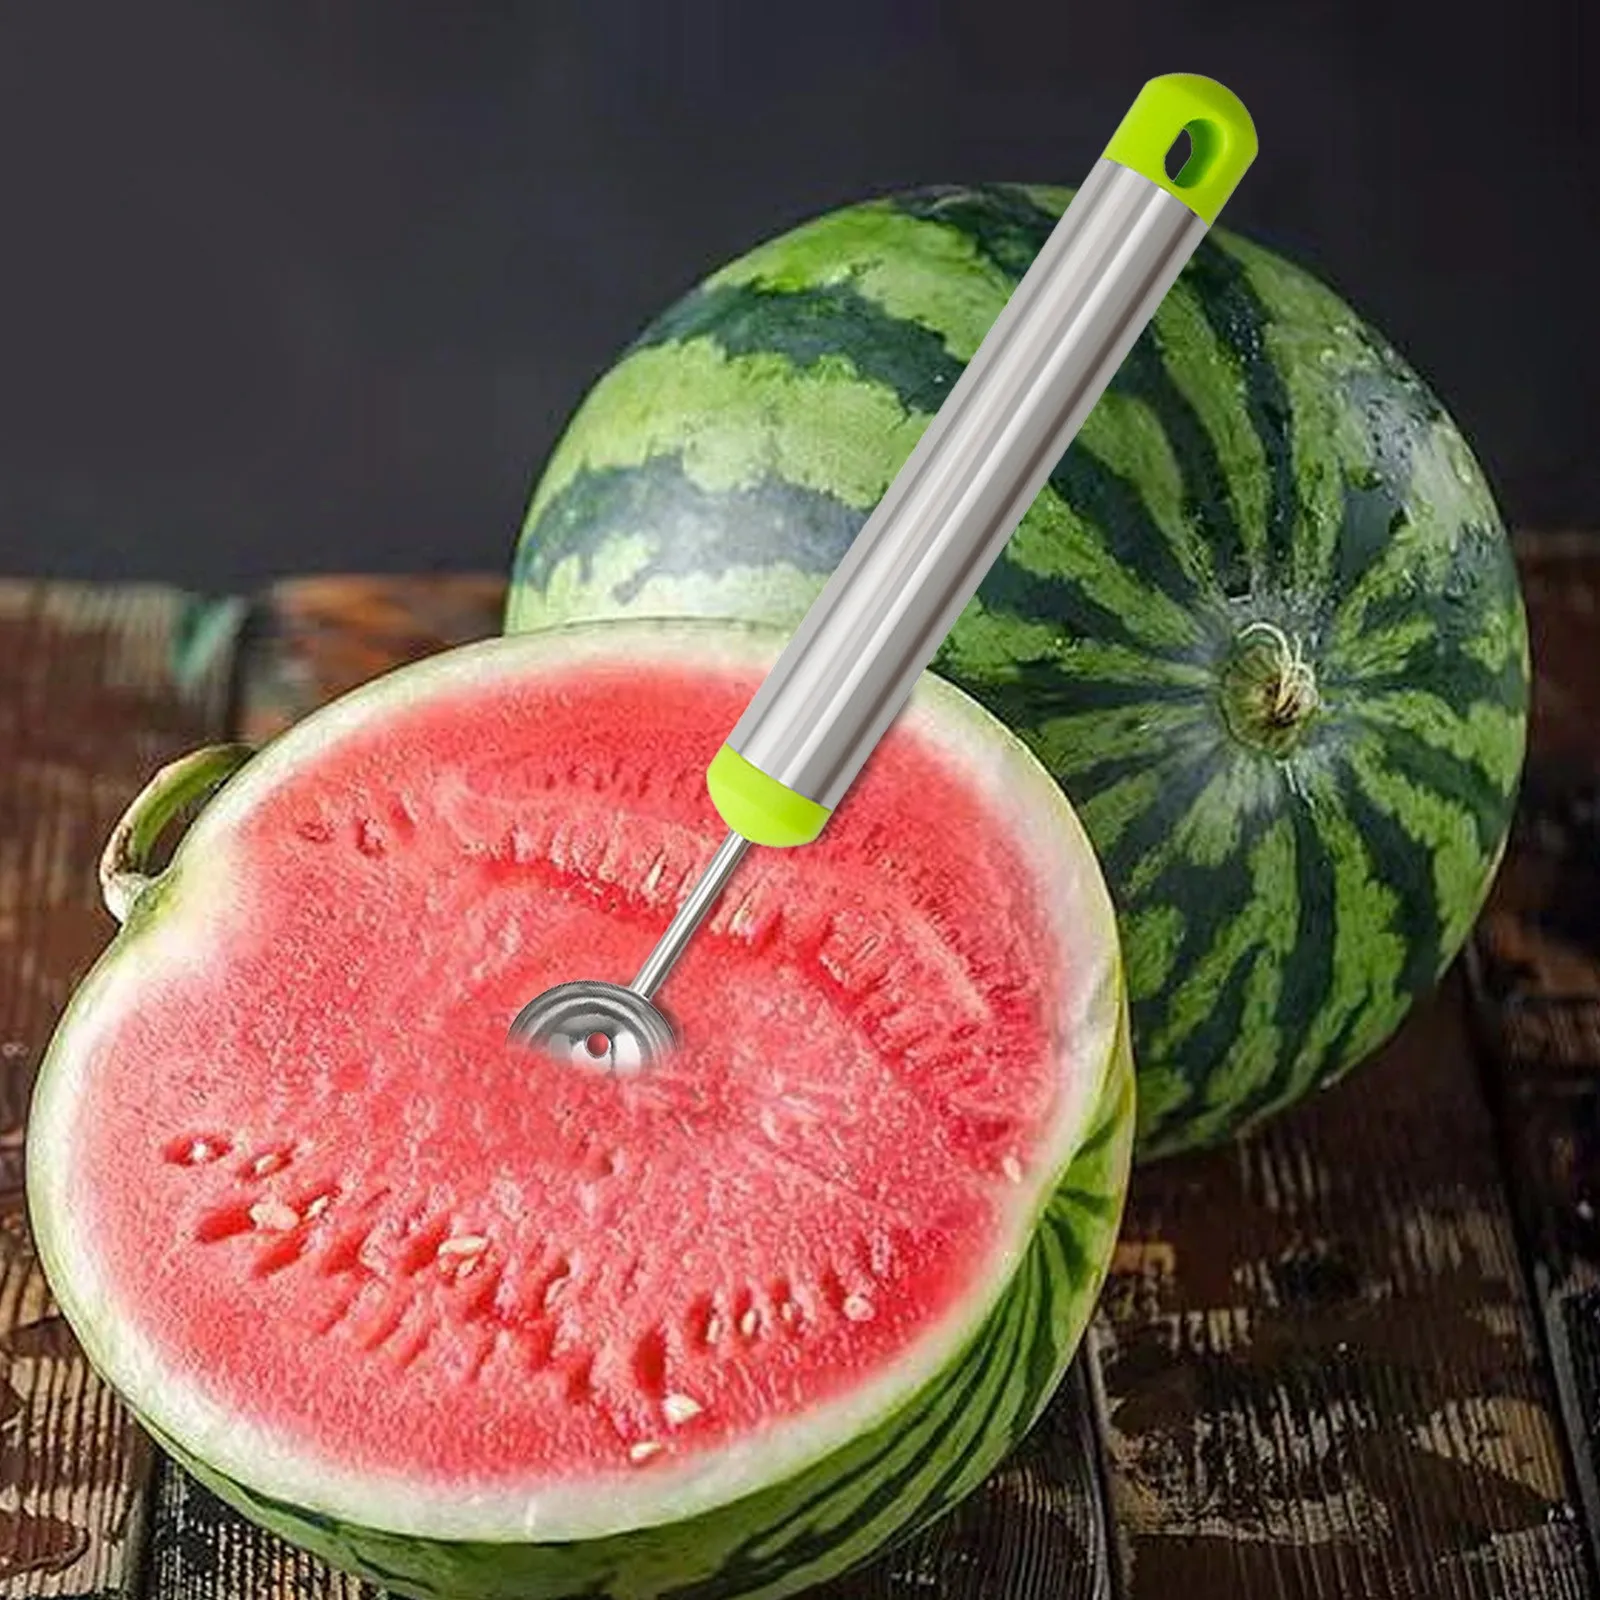 

Stainless Steel Ball Digging Spoon Watermelon Ball Scoop Fruit Spoon Ice Cream Sorbet Cooking Tool Kitchen Accessories Gadgets